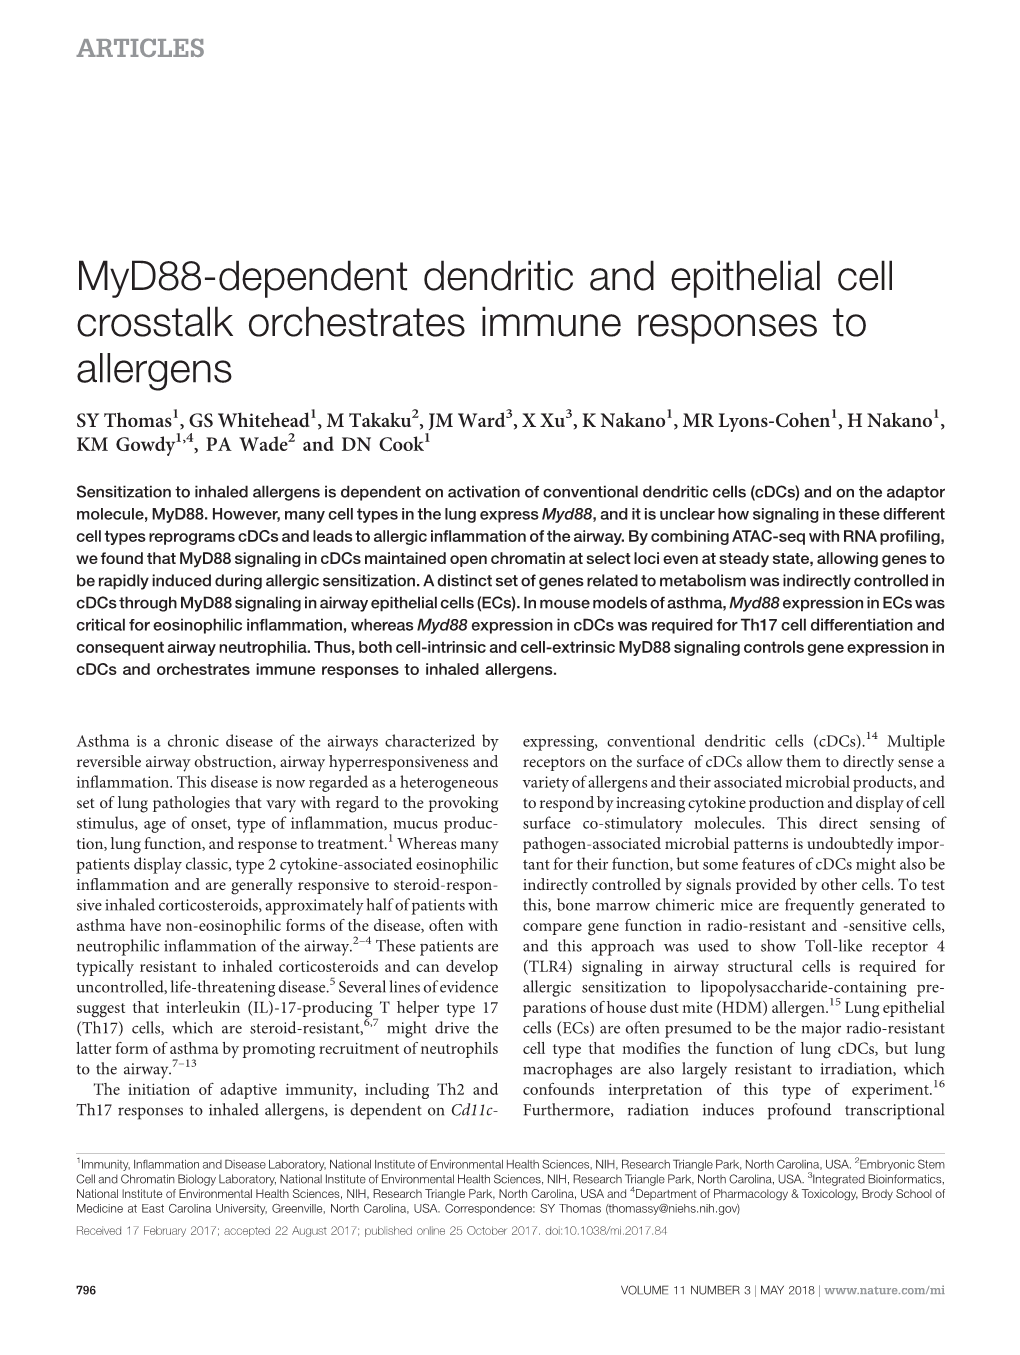 Myd88-Dependent Dendritic and Epithelial Cell Crosstalk Orchestrates Immune Responses to Allergens